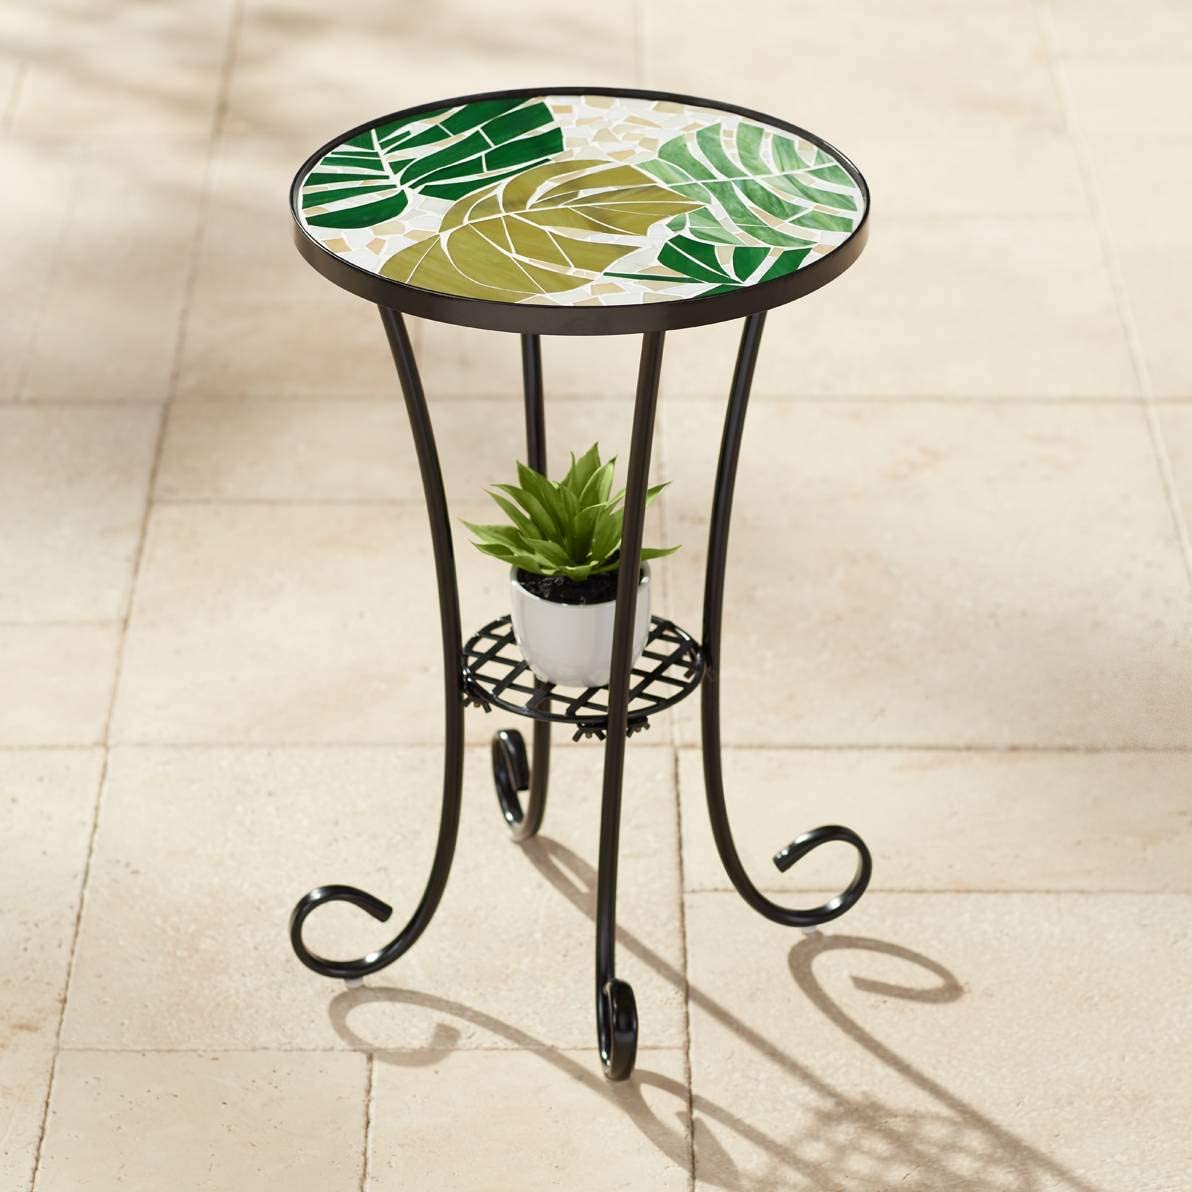 mosaic table chairs set-1